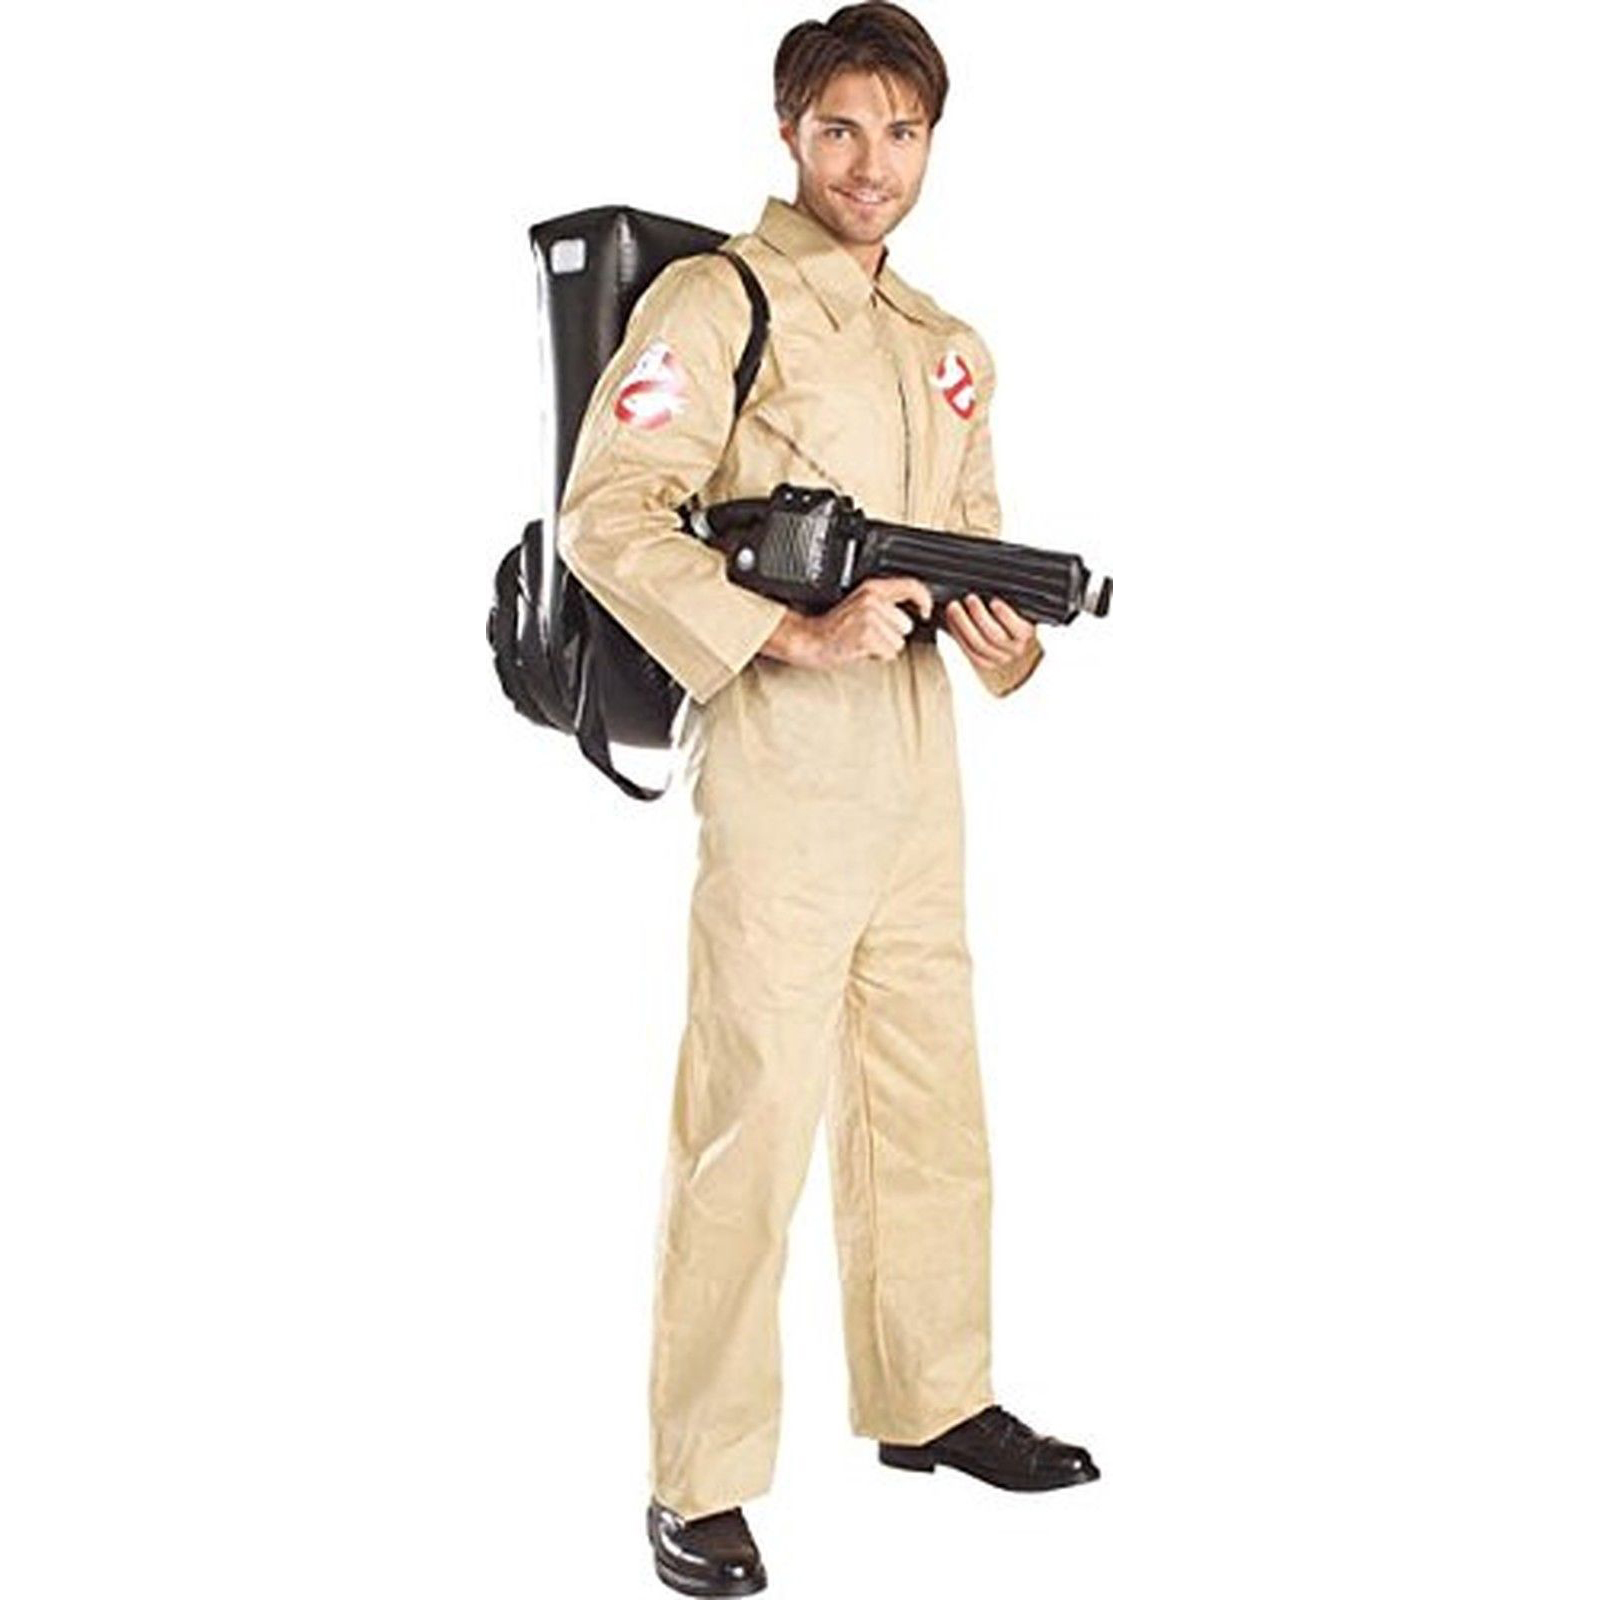 Rubie's Ghostbusters Peter Venkman Men's Halloween Fancy-Dress Costume for Adult, One Size - image 1 of 4